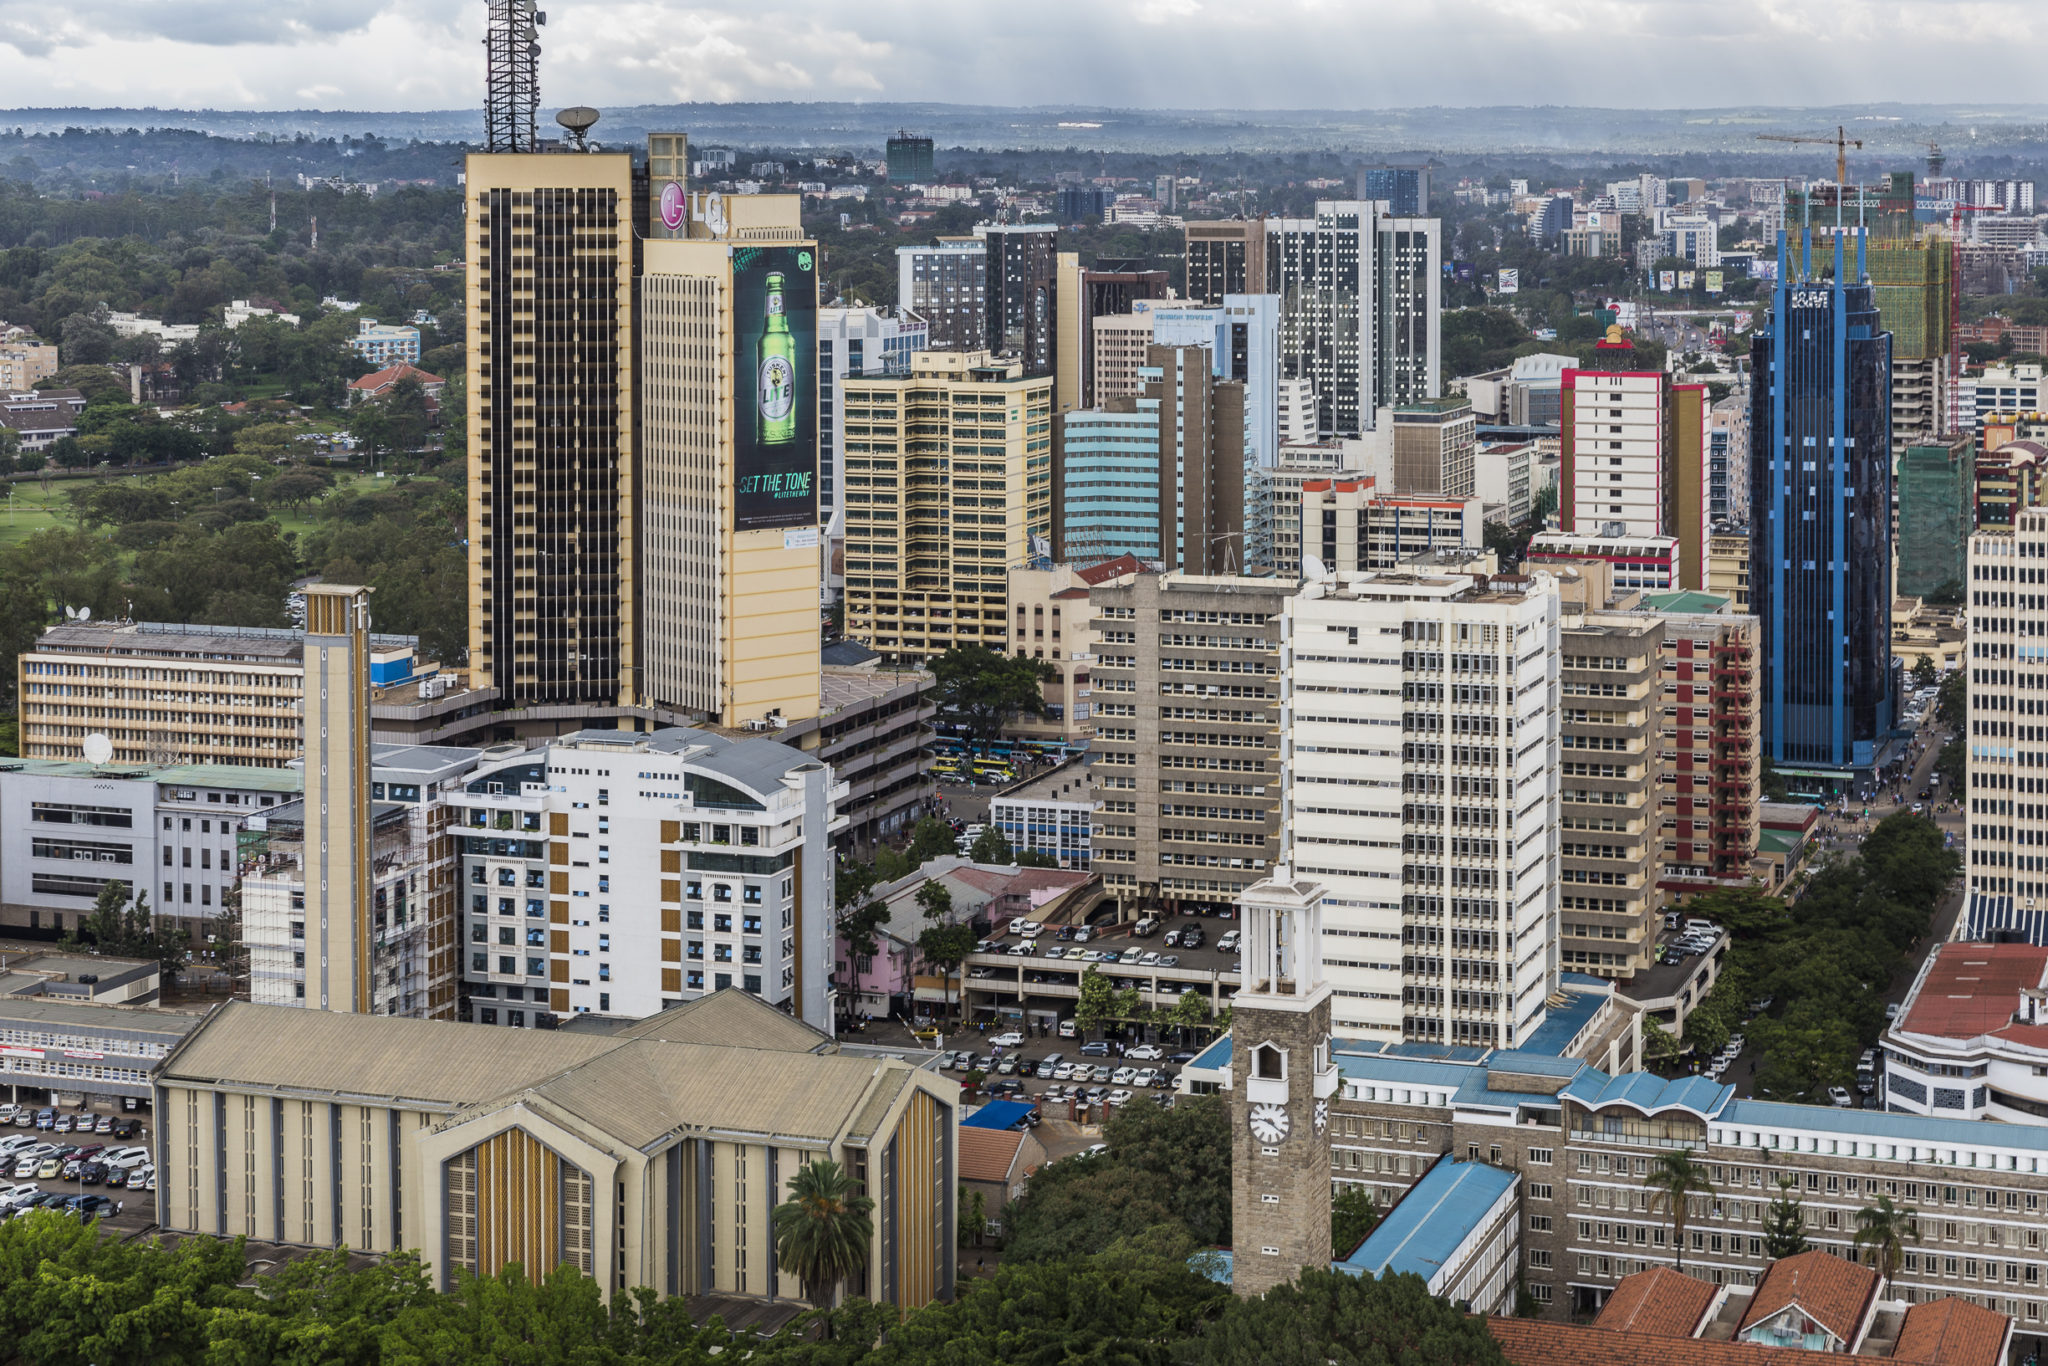 How to find a job in Nairobi. Discover Walks Blog